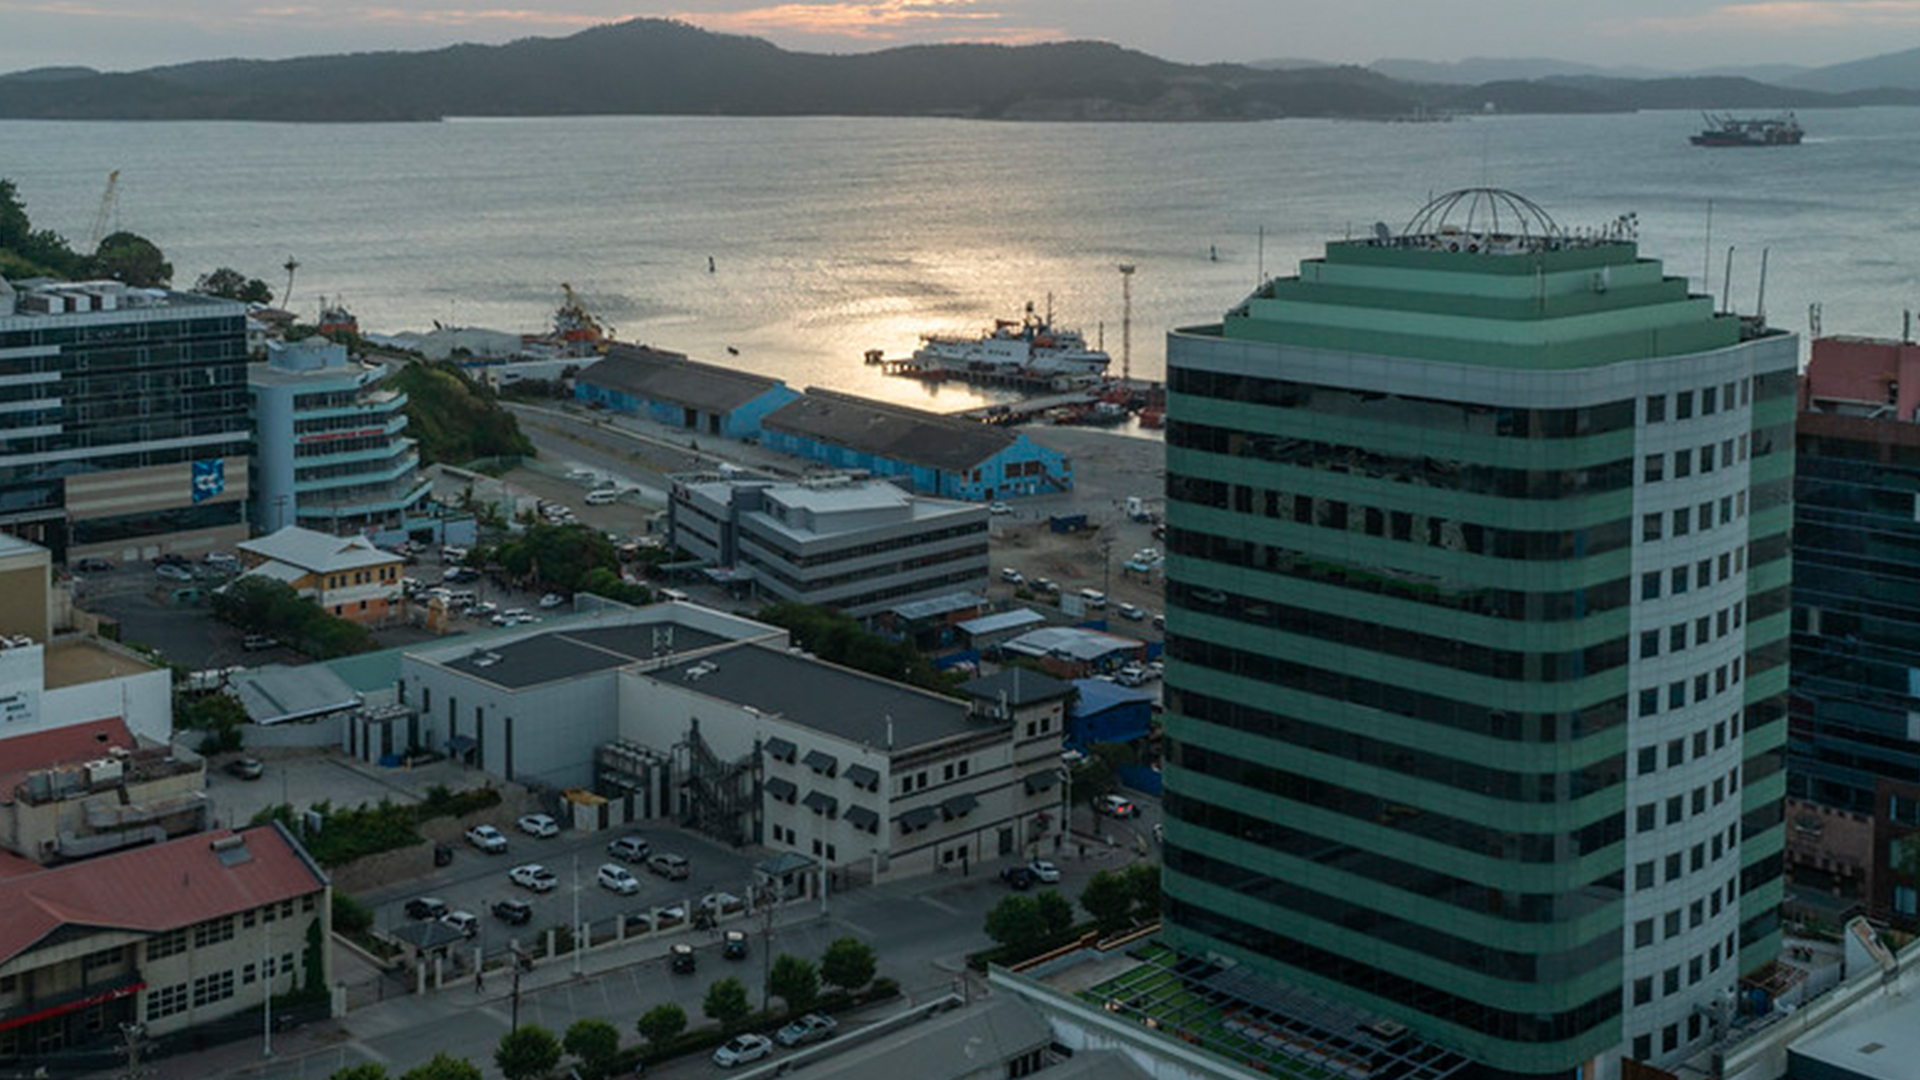 Aerial view of the business district in Port Moresby, Papua New Guinea.